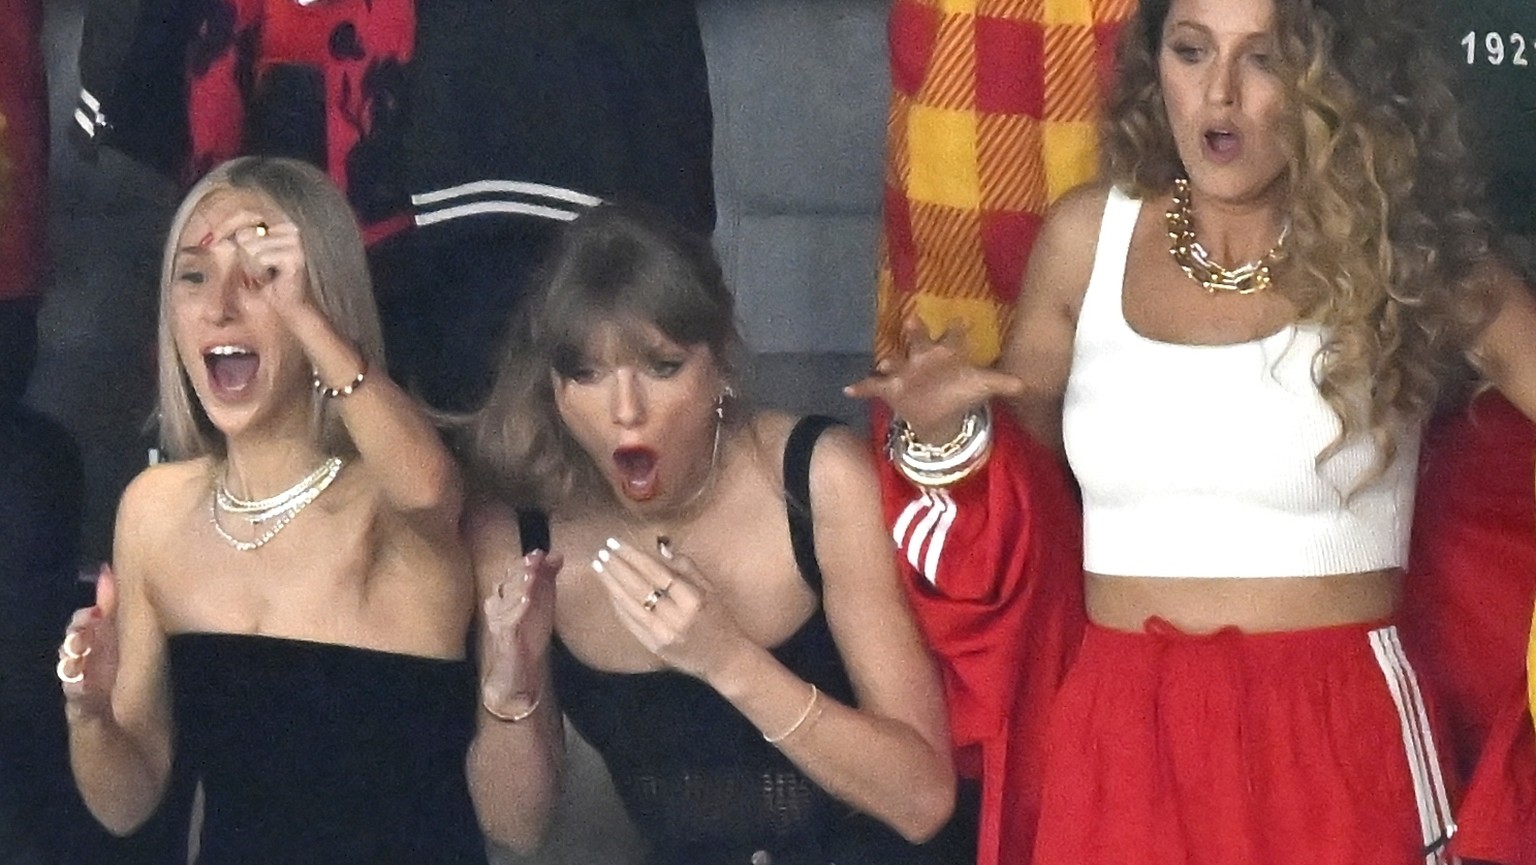 Ice Spice, from left, Ashley Avignone Taylor Swift and Blake Lively react during the first half of the NFL Super Bowl 58 football game between the San Francisco 49ers and the Kansas City Chiefs on Sun ...